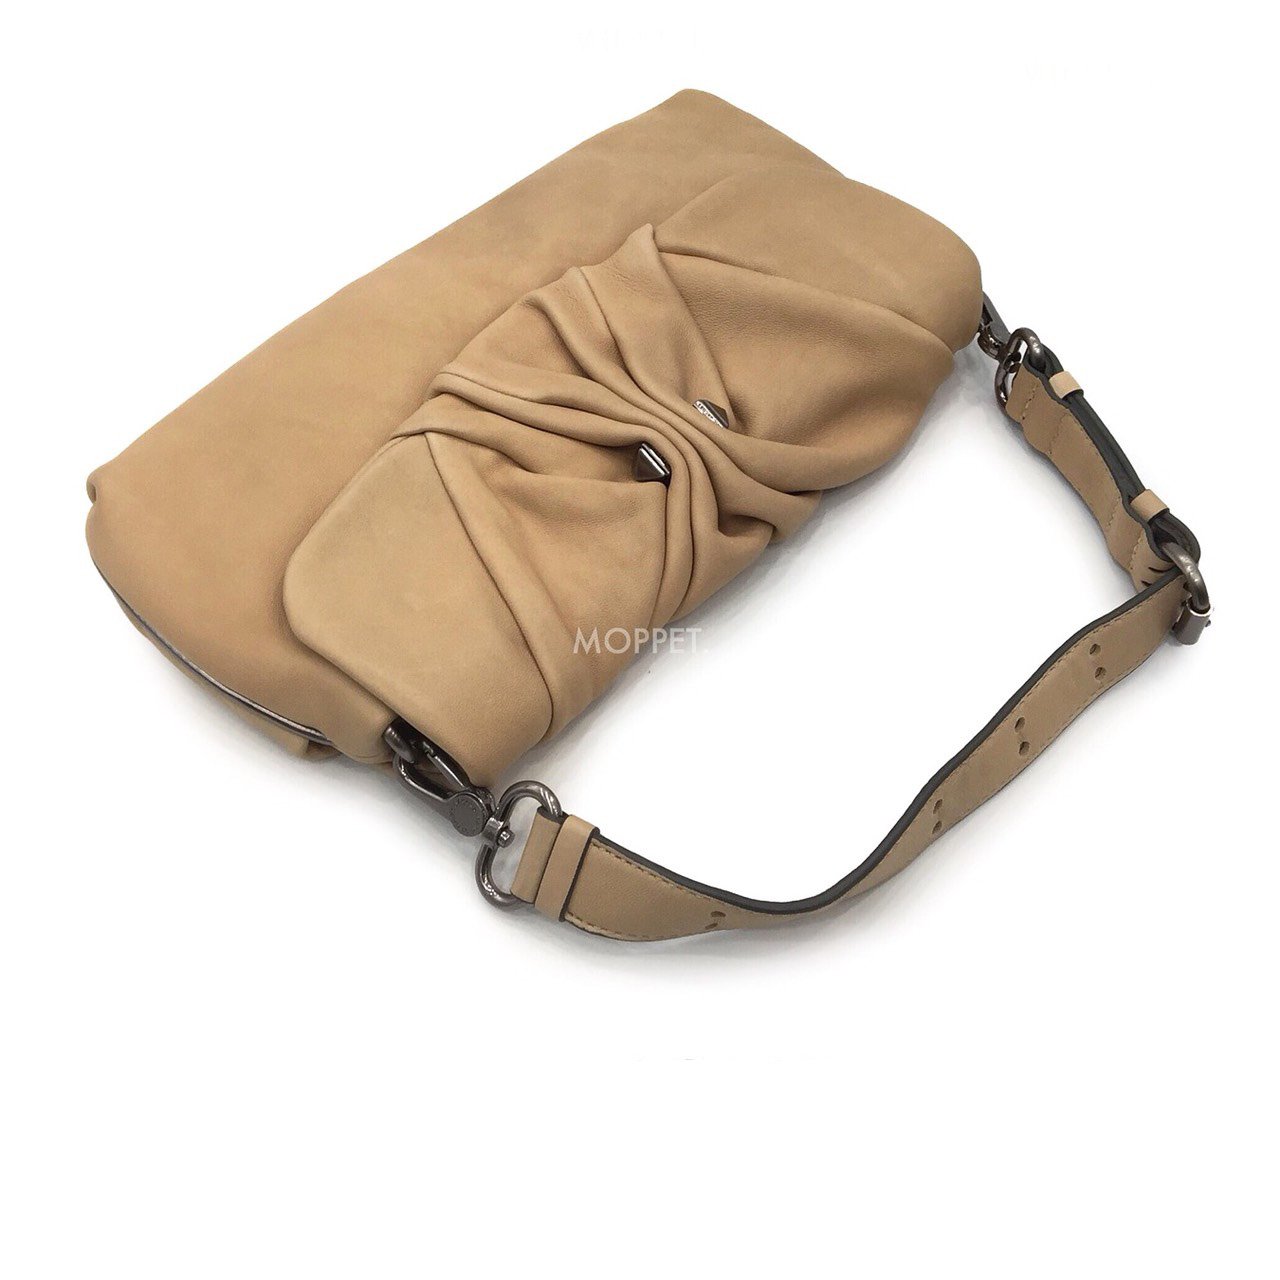 Used Marc By Marc Jacobs 2 Way bag in Beige Leather RHW 